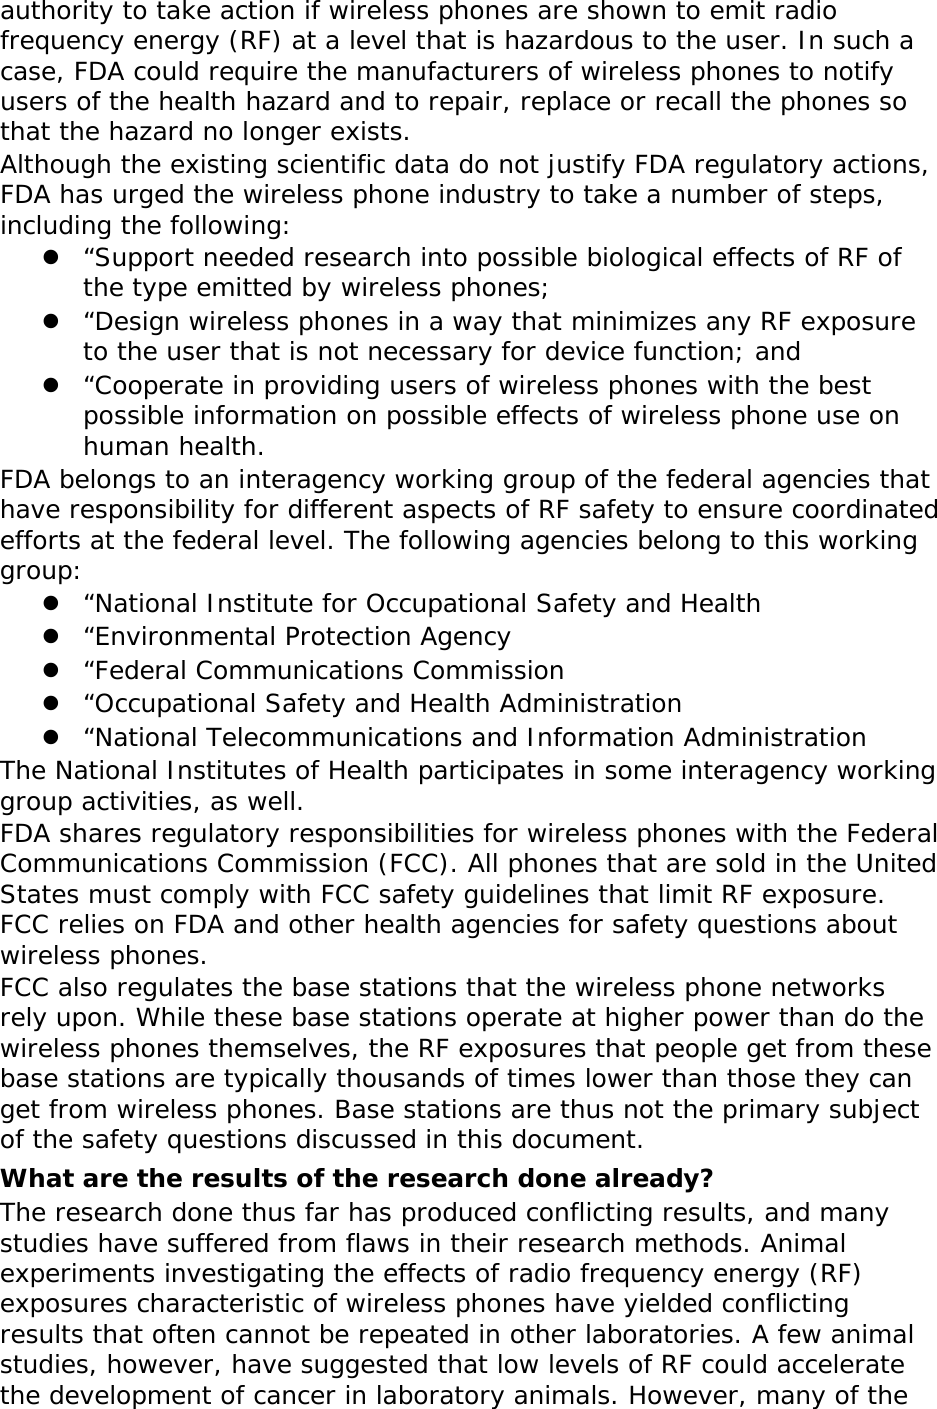 authority to take action if wireless phones are shown to emit radio frequency energy (RF) at a level that is hazardous to the user. In such a case, FDA could require the manufacturers of wireless phones to notify users of the health hazard and to repair, replace or recall the phones so that the hazard no longer exists. Although the existing scientific data do not justify FDA regulatory actions, FDA has urged the wireless phone industry to take a number of steps, including the following:  “Support needed research into possible biological effects of RF of the type emitted by wireless phones;  “Design wireless phones in a way that minimizes any RF exposure to the user that is not necessary for device function; and  “Cooperate in providing users of wireless phones with the best possible information on possible effects of wireless phone use on human health. FDA belongs to an interagency working group of the federal agencies that have responsibility for different aspects of RF safety to ensure coordinated efforts at the federal level. The following agencies belong to this working group:  “National Institute for Occupational Safety and Health  “Environmental Protection Agency  “Federal Communications Commission  “Occupational Safety and Health Administration  “National Telecommunications and Information Administration The National Institutes of Health participates in some interagency working group activities, as well. FDA shares regulatory responsibilities for wireless phones with the Federal Communications Commission (FCC). All phones that are sold in the United States must comply with FCC safety guidelines that limit RF exposure. FCC relies on FDA and other health agencies for safety questions about wireless phones. FCC also regulates the base stations that the wireless phone networks rely upon. While these base stations operate at higher power than do the wireless phones themselves, the RF exposures that people get from these base stations are typically thousands of times lower than those they can get from wireless phones. Base stations are thus not the primary subject of the safety questions discussed in this document. What are the results of the research done already? The research done thus far has produced conflicting results, and many studies have suffered from flaws in their research methods. Animal experiments investigating the effects of radio frequency energy (RF) exposures characteristic of wireless phones have yielded conflicting results that often cannot be repeated in other laboratories. A few animal studies, however, have suggested that low levels of RF could accelerate the development of cancer in laboratory animals. However, many of the 